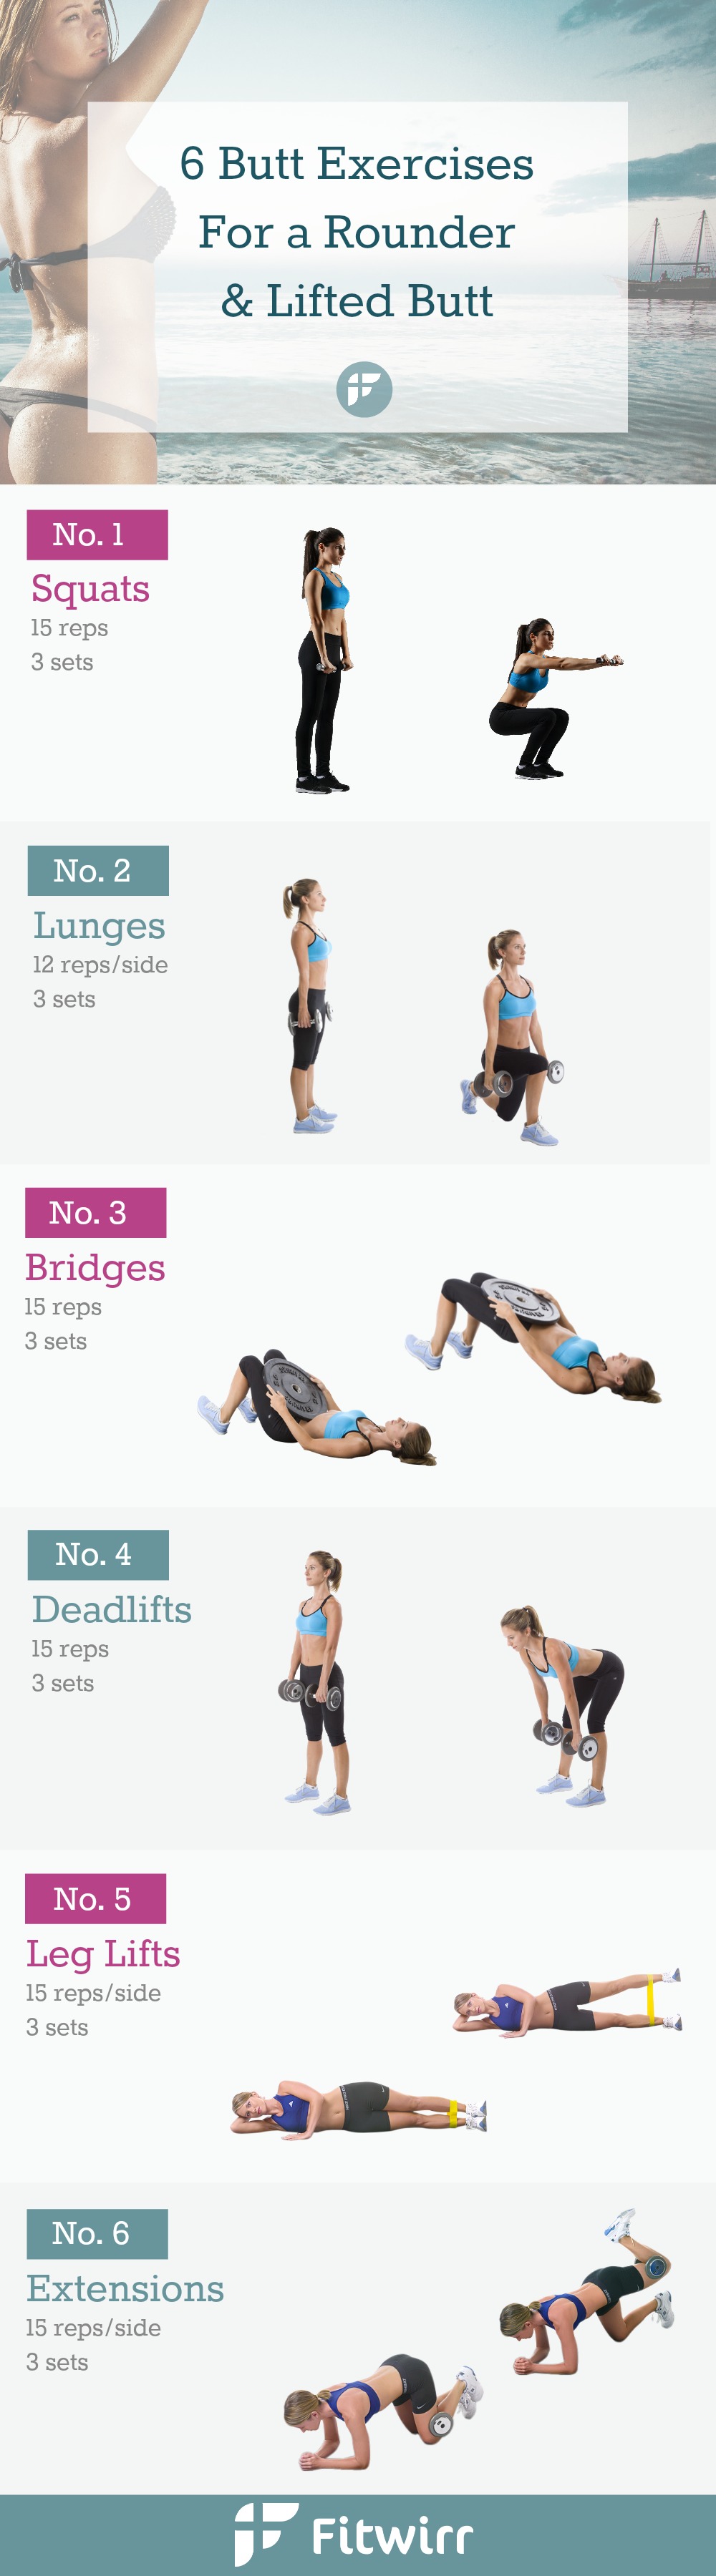 Intense Booty Workouts That Will Give You A Bigger Firmer Butt TrimmedandToned